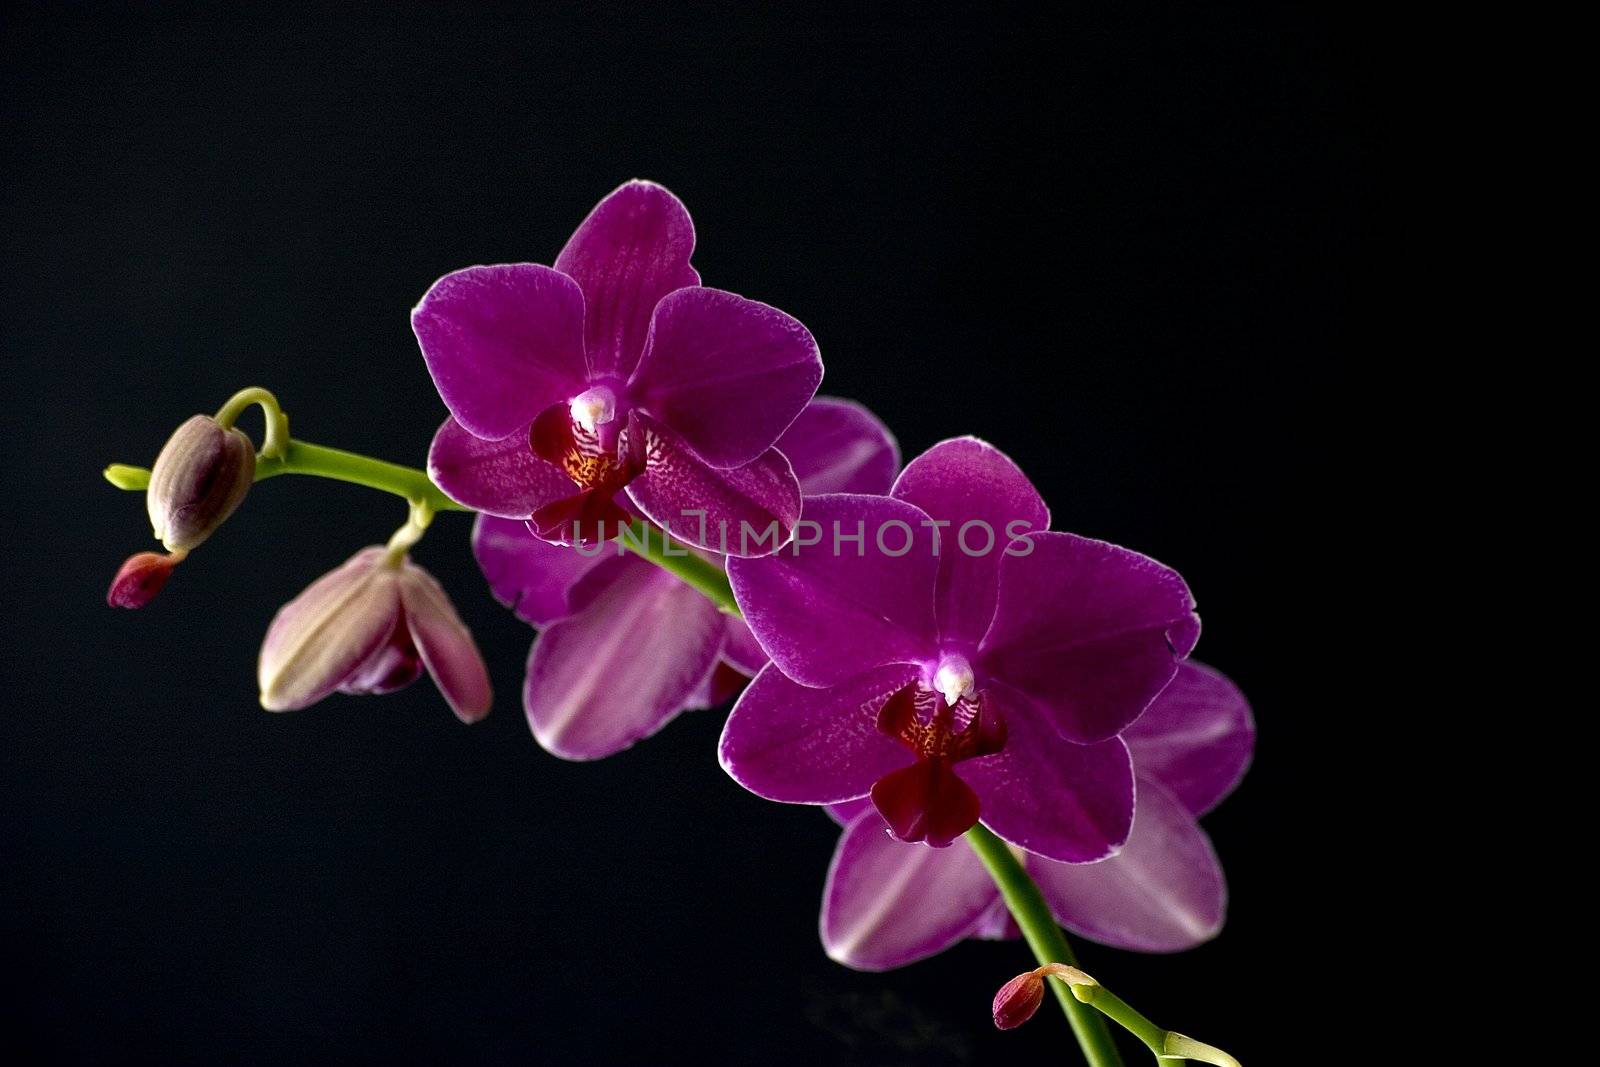 A sprig of pink orchids against a black background
